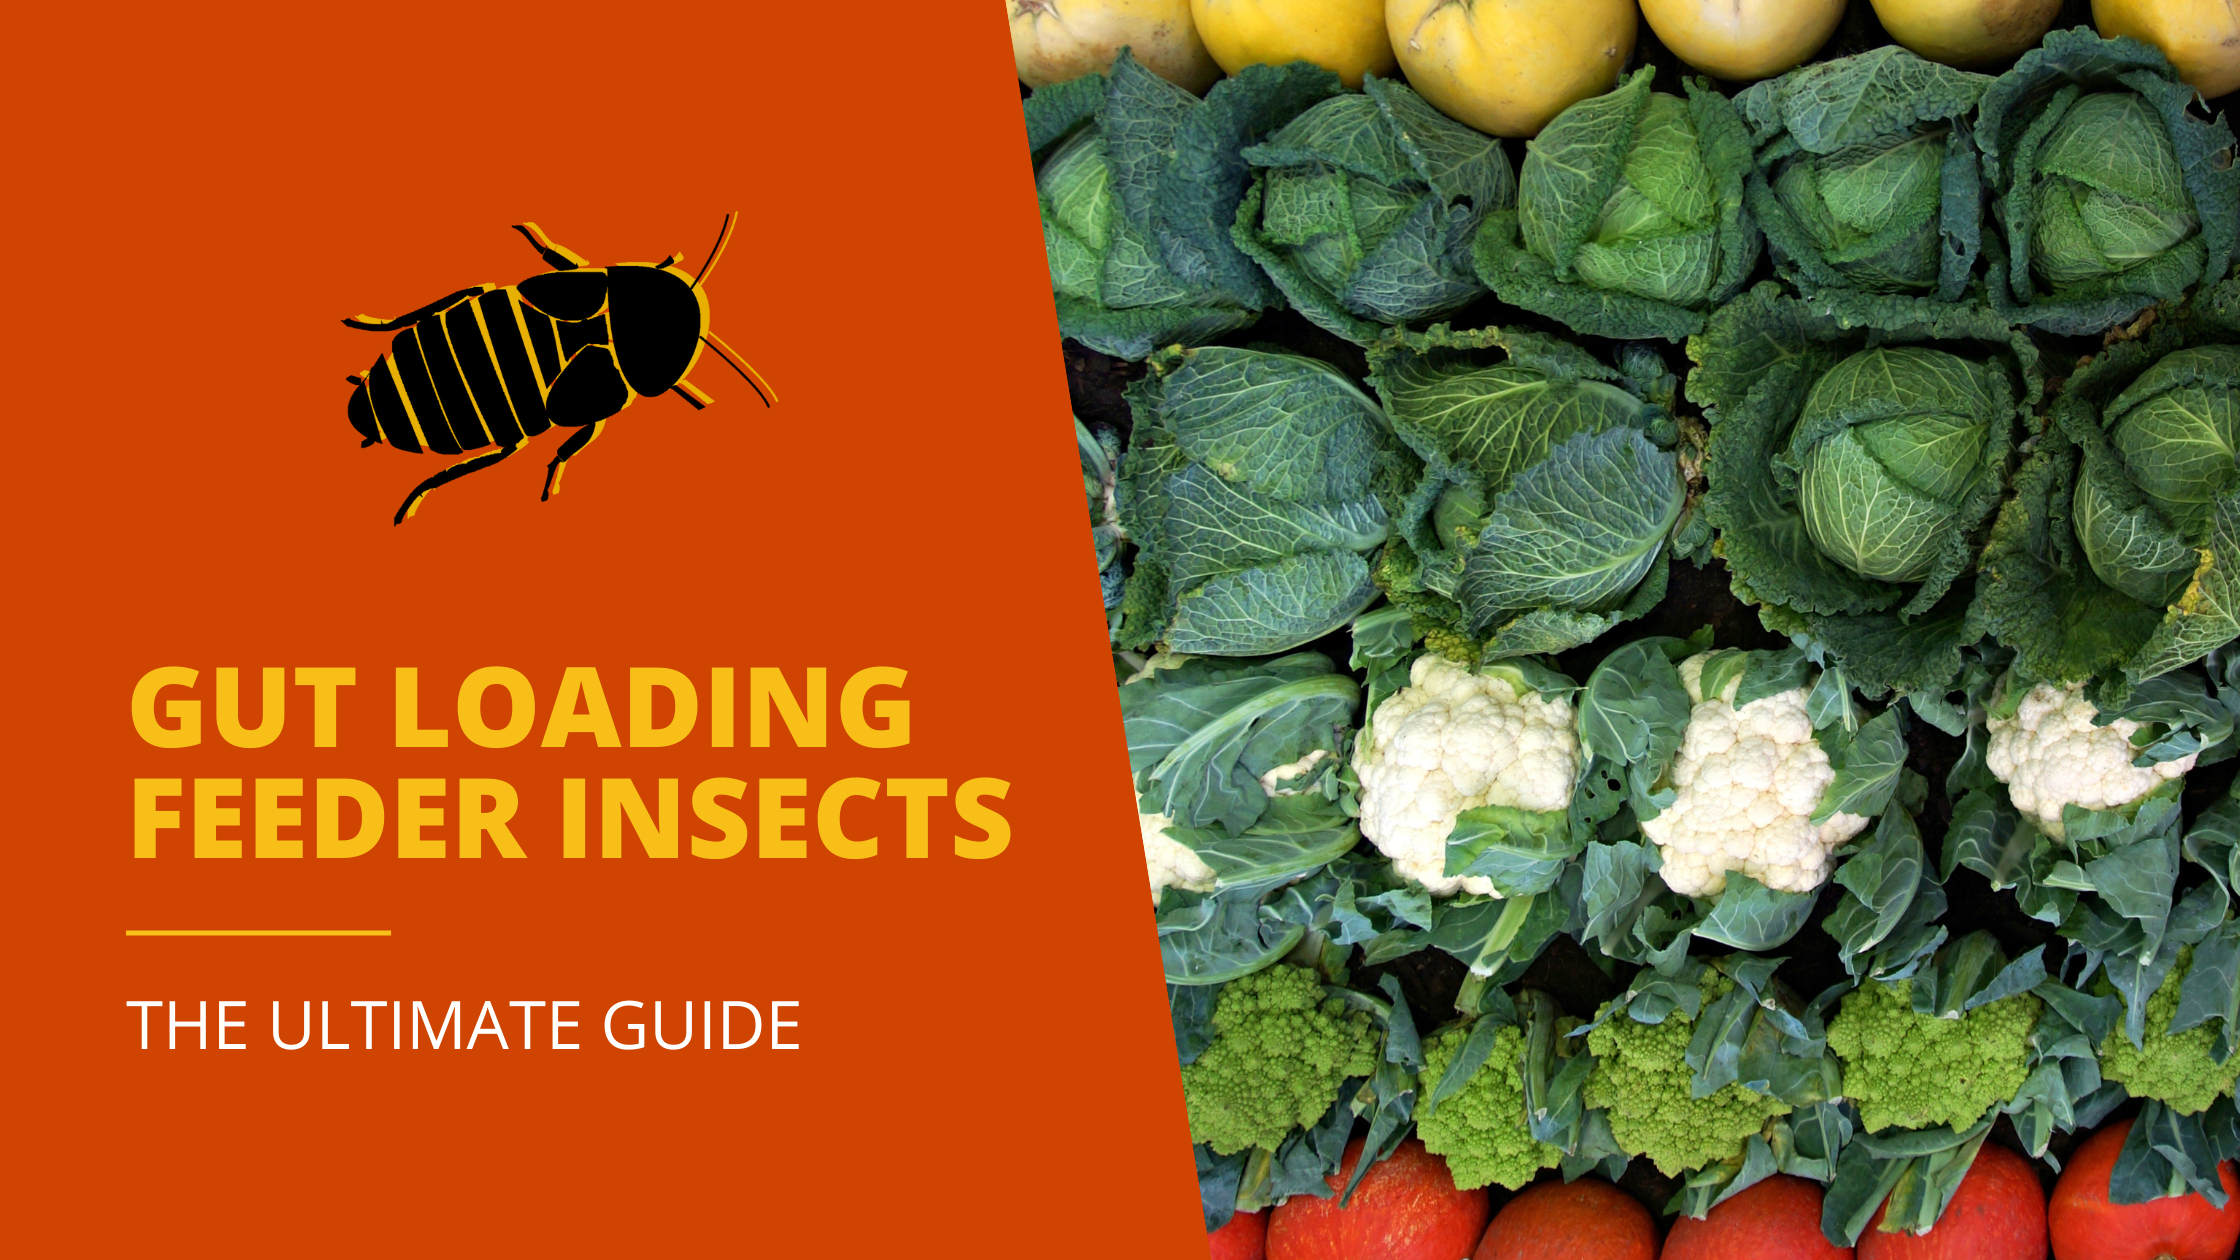 gut loading feeder insects blog header image